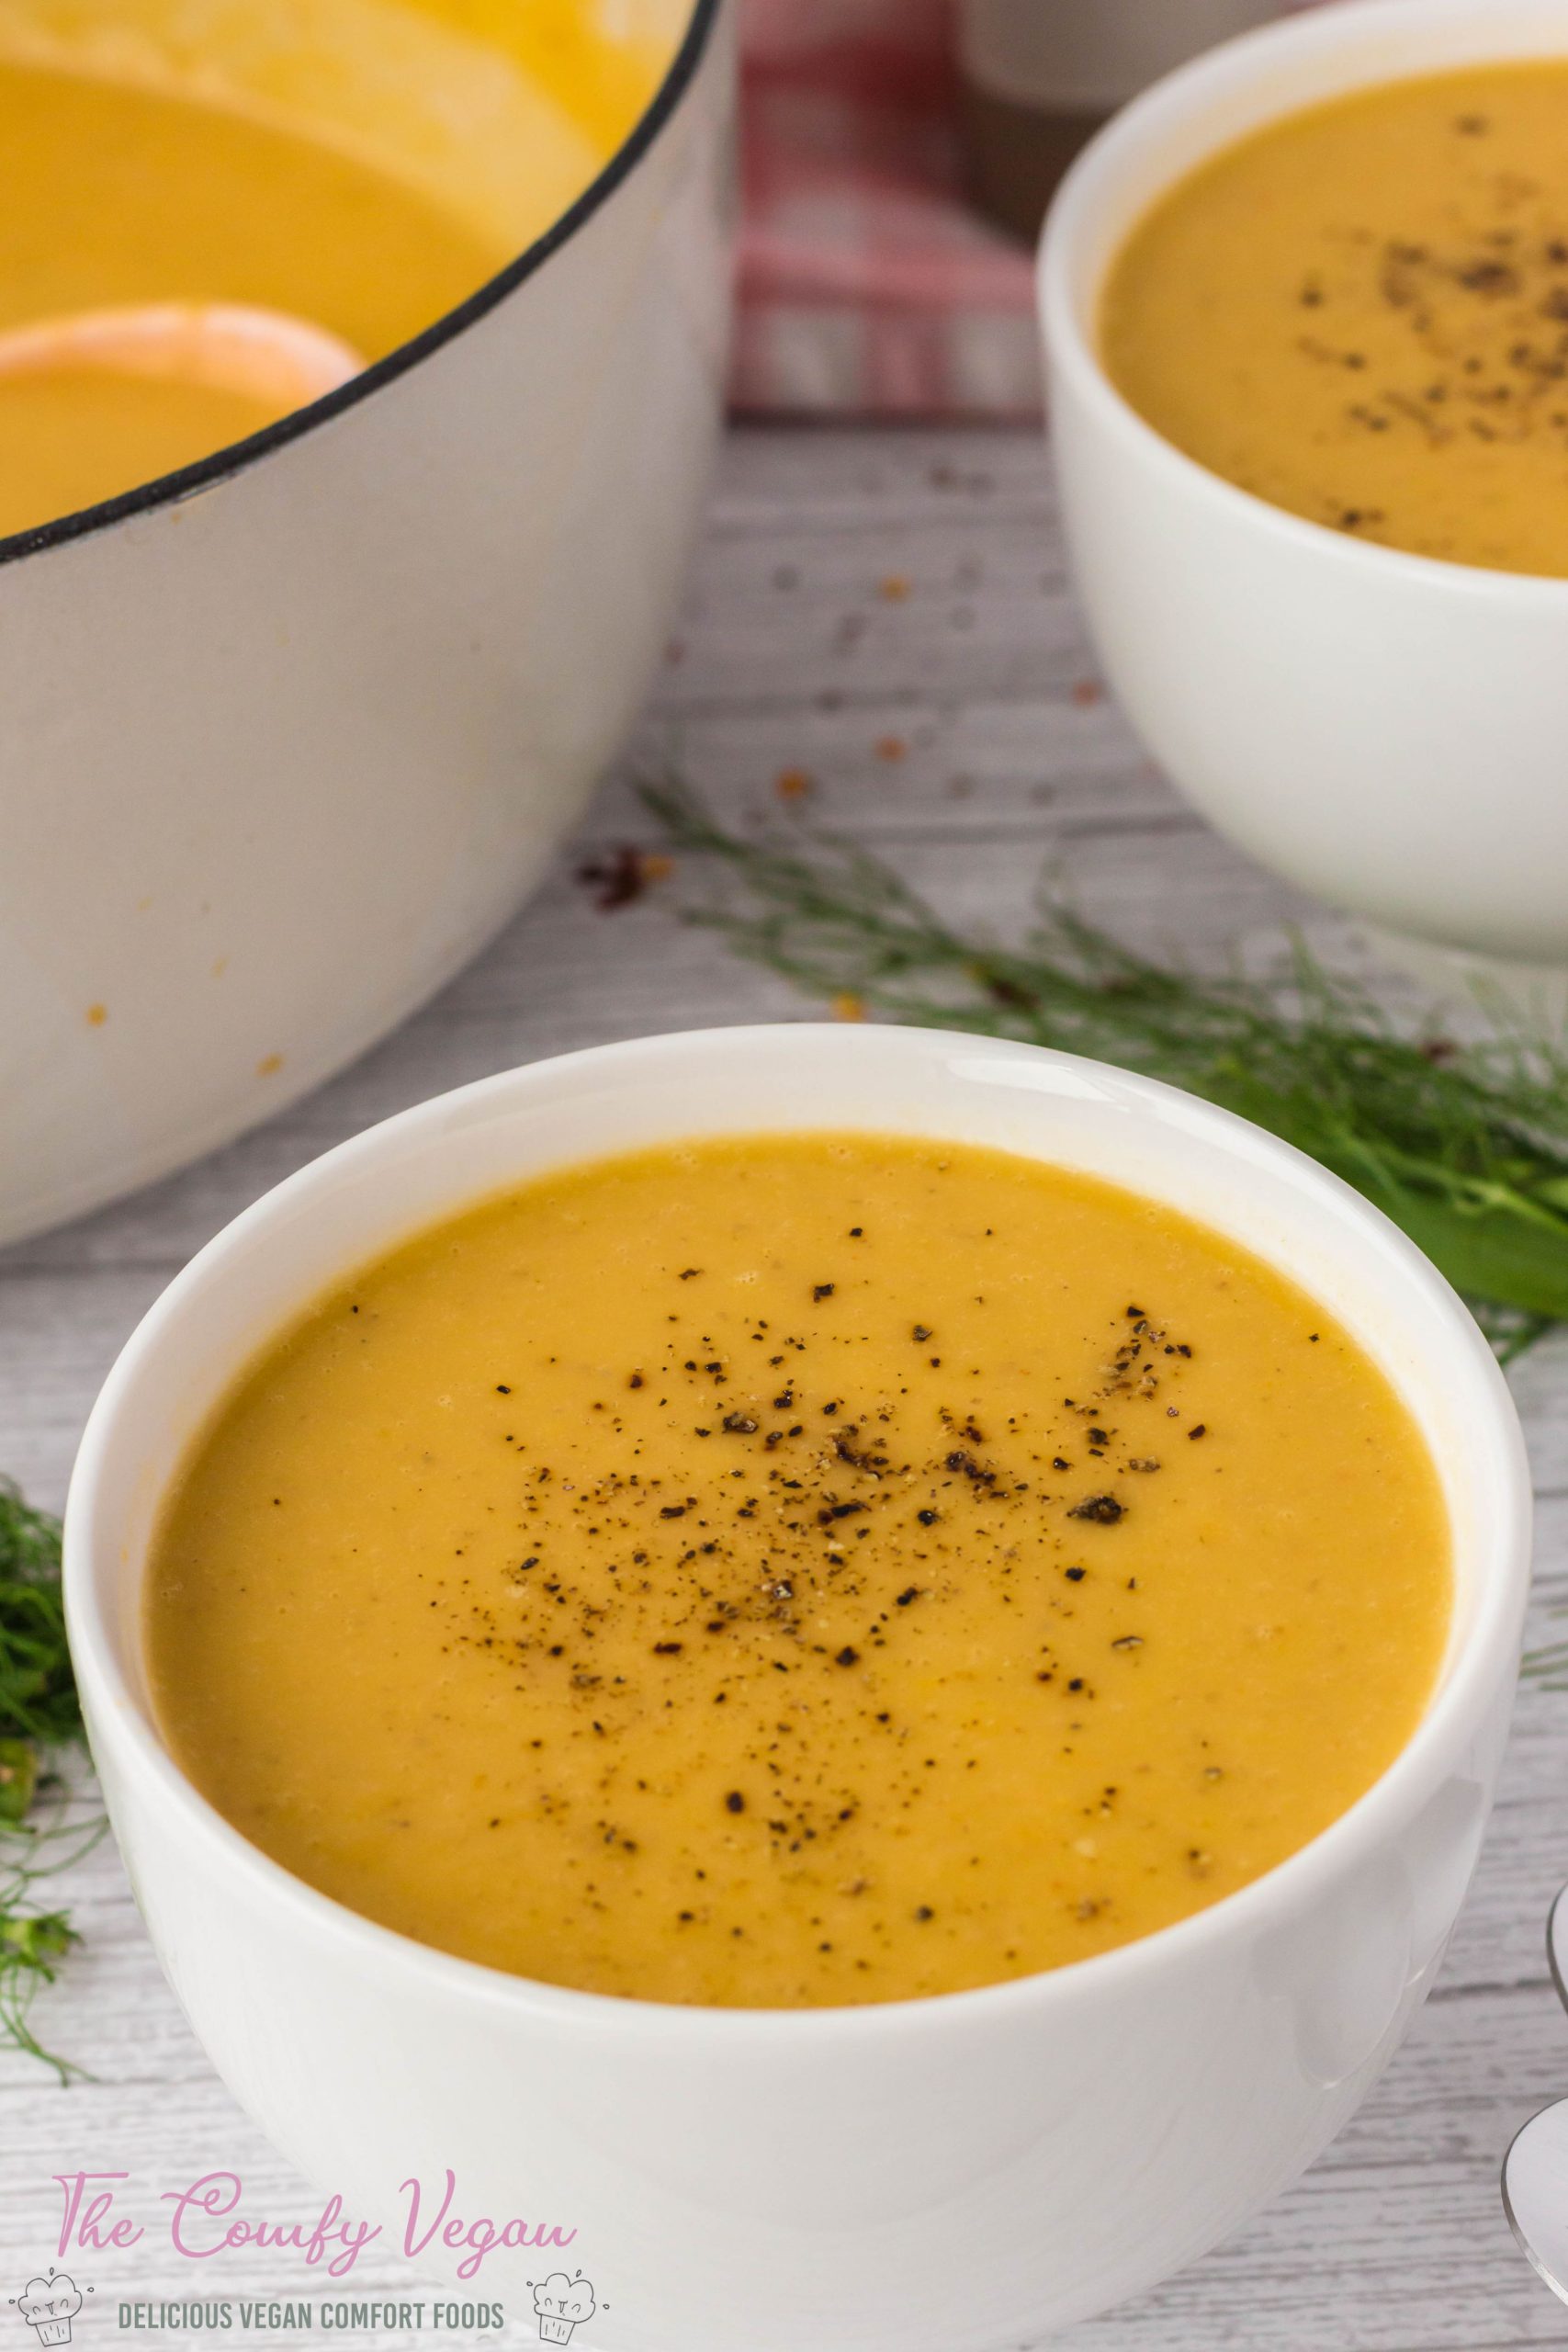 Comforting, creamy and so delicious this Vegan Fennel Soup recipe is perfect on a cold day! Made with potatoes, fennel, and other veggies this roasted fennel soup is big on flavor. Serve with some delicious vegan dinner rolls to feed a crowd.